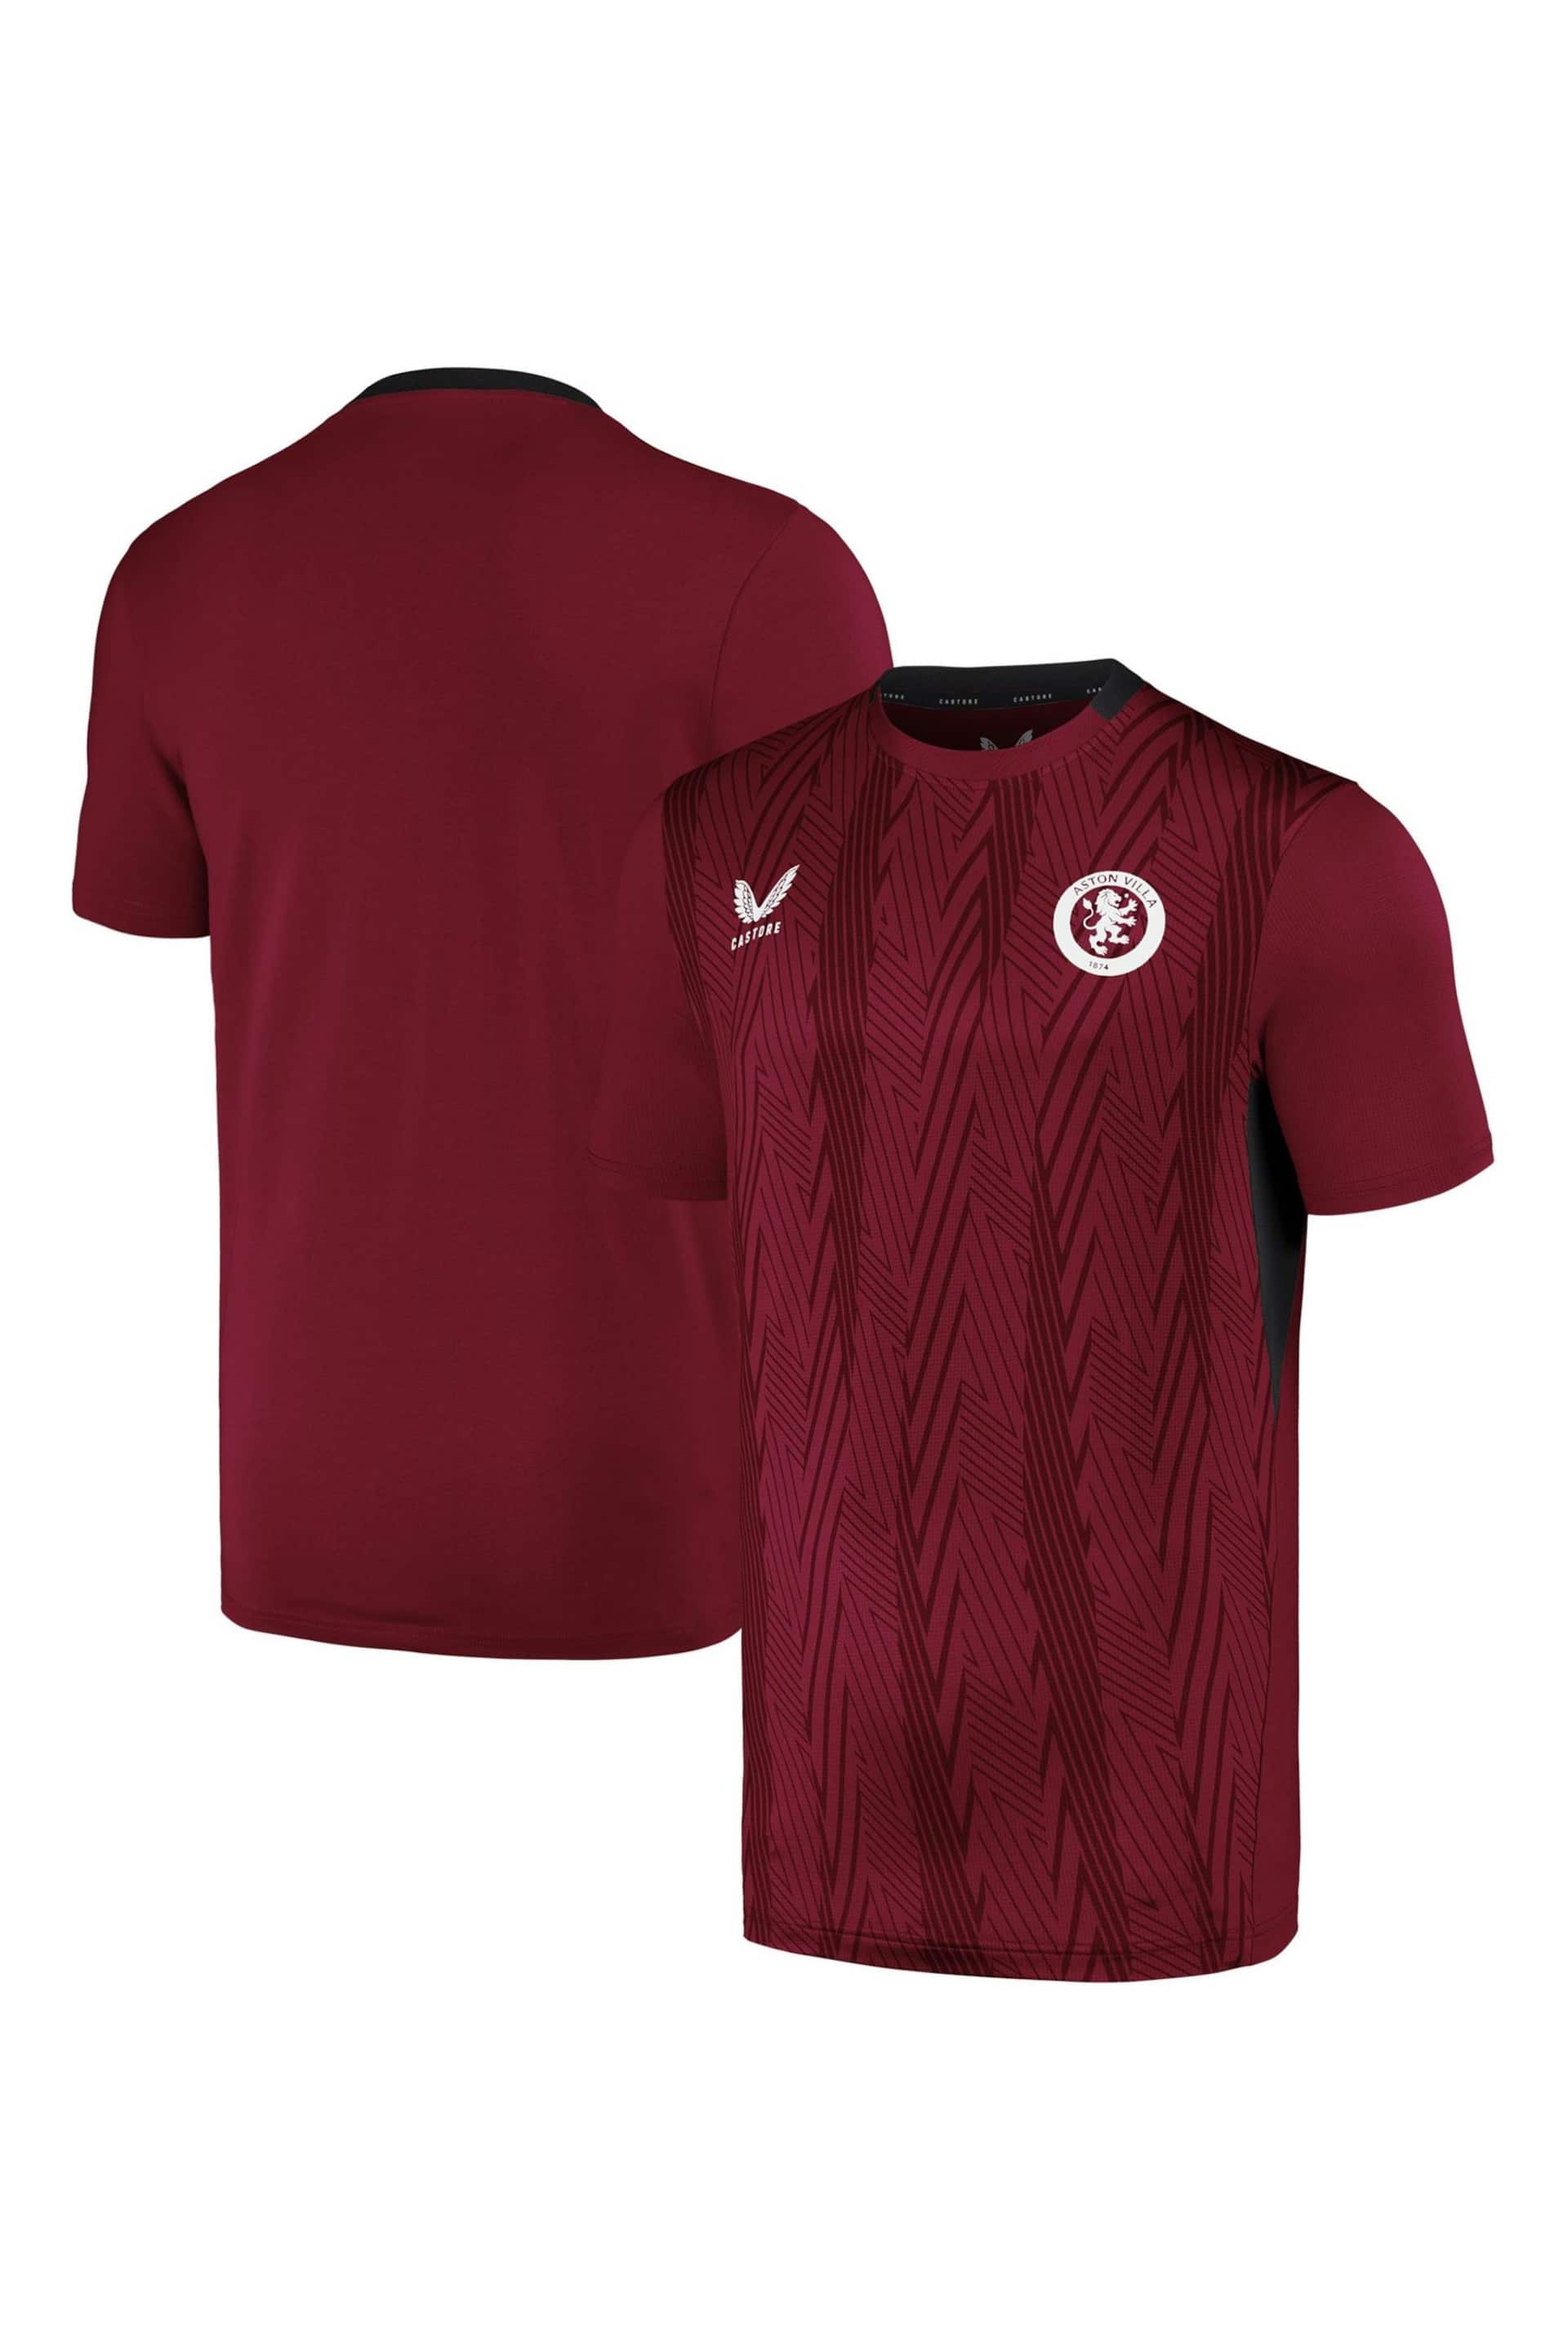 Castore Red Aston Villa Players Training Top - Image 1 of 3